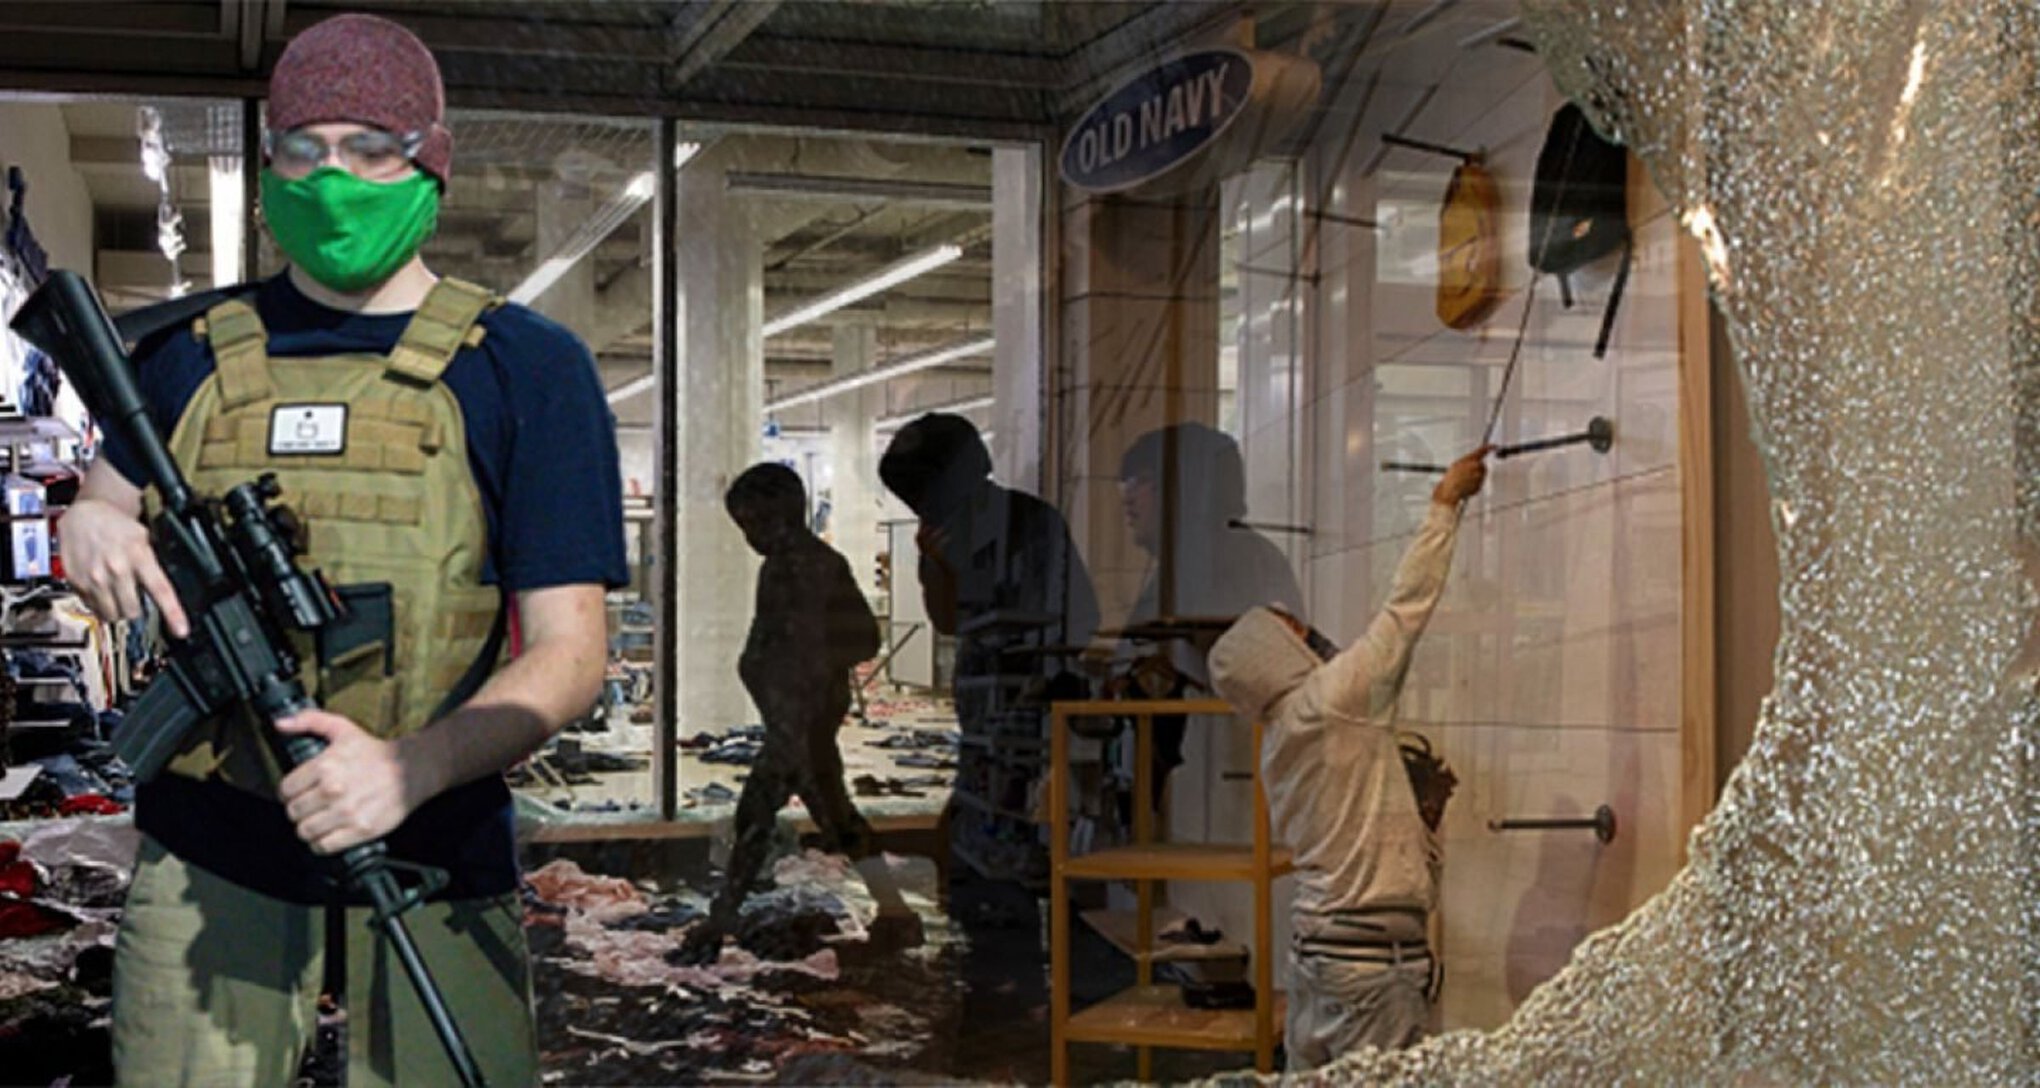 Digital altered image compiling multiple photos of looting and protest scenes